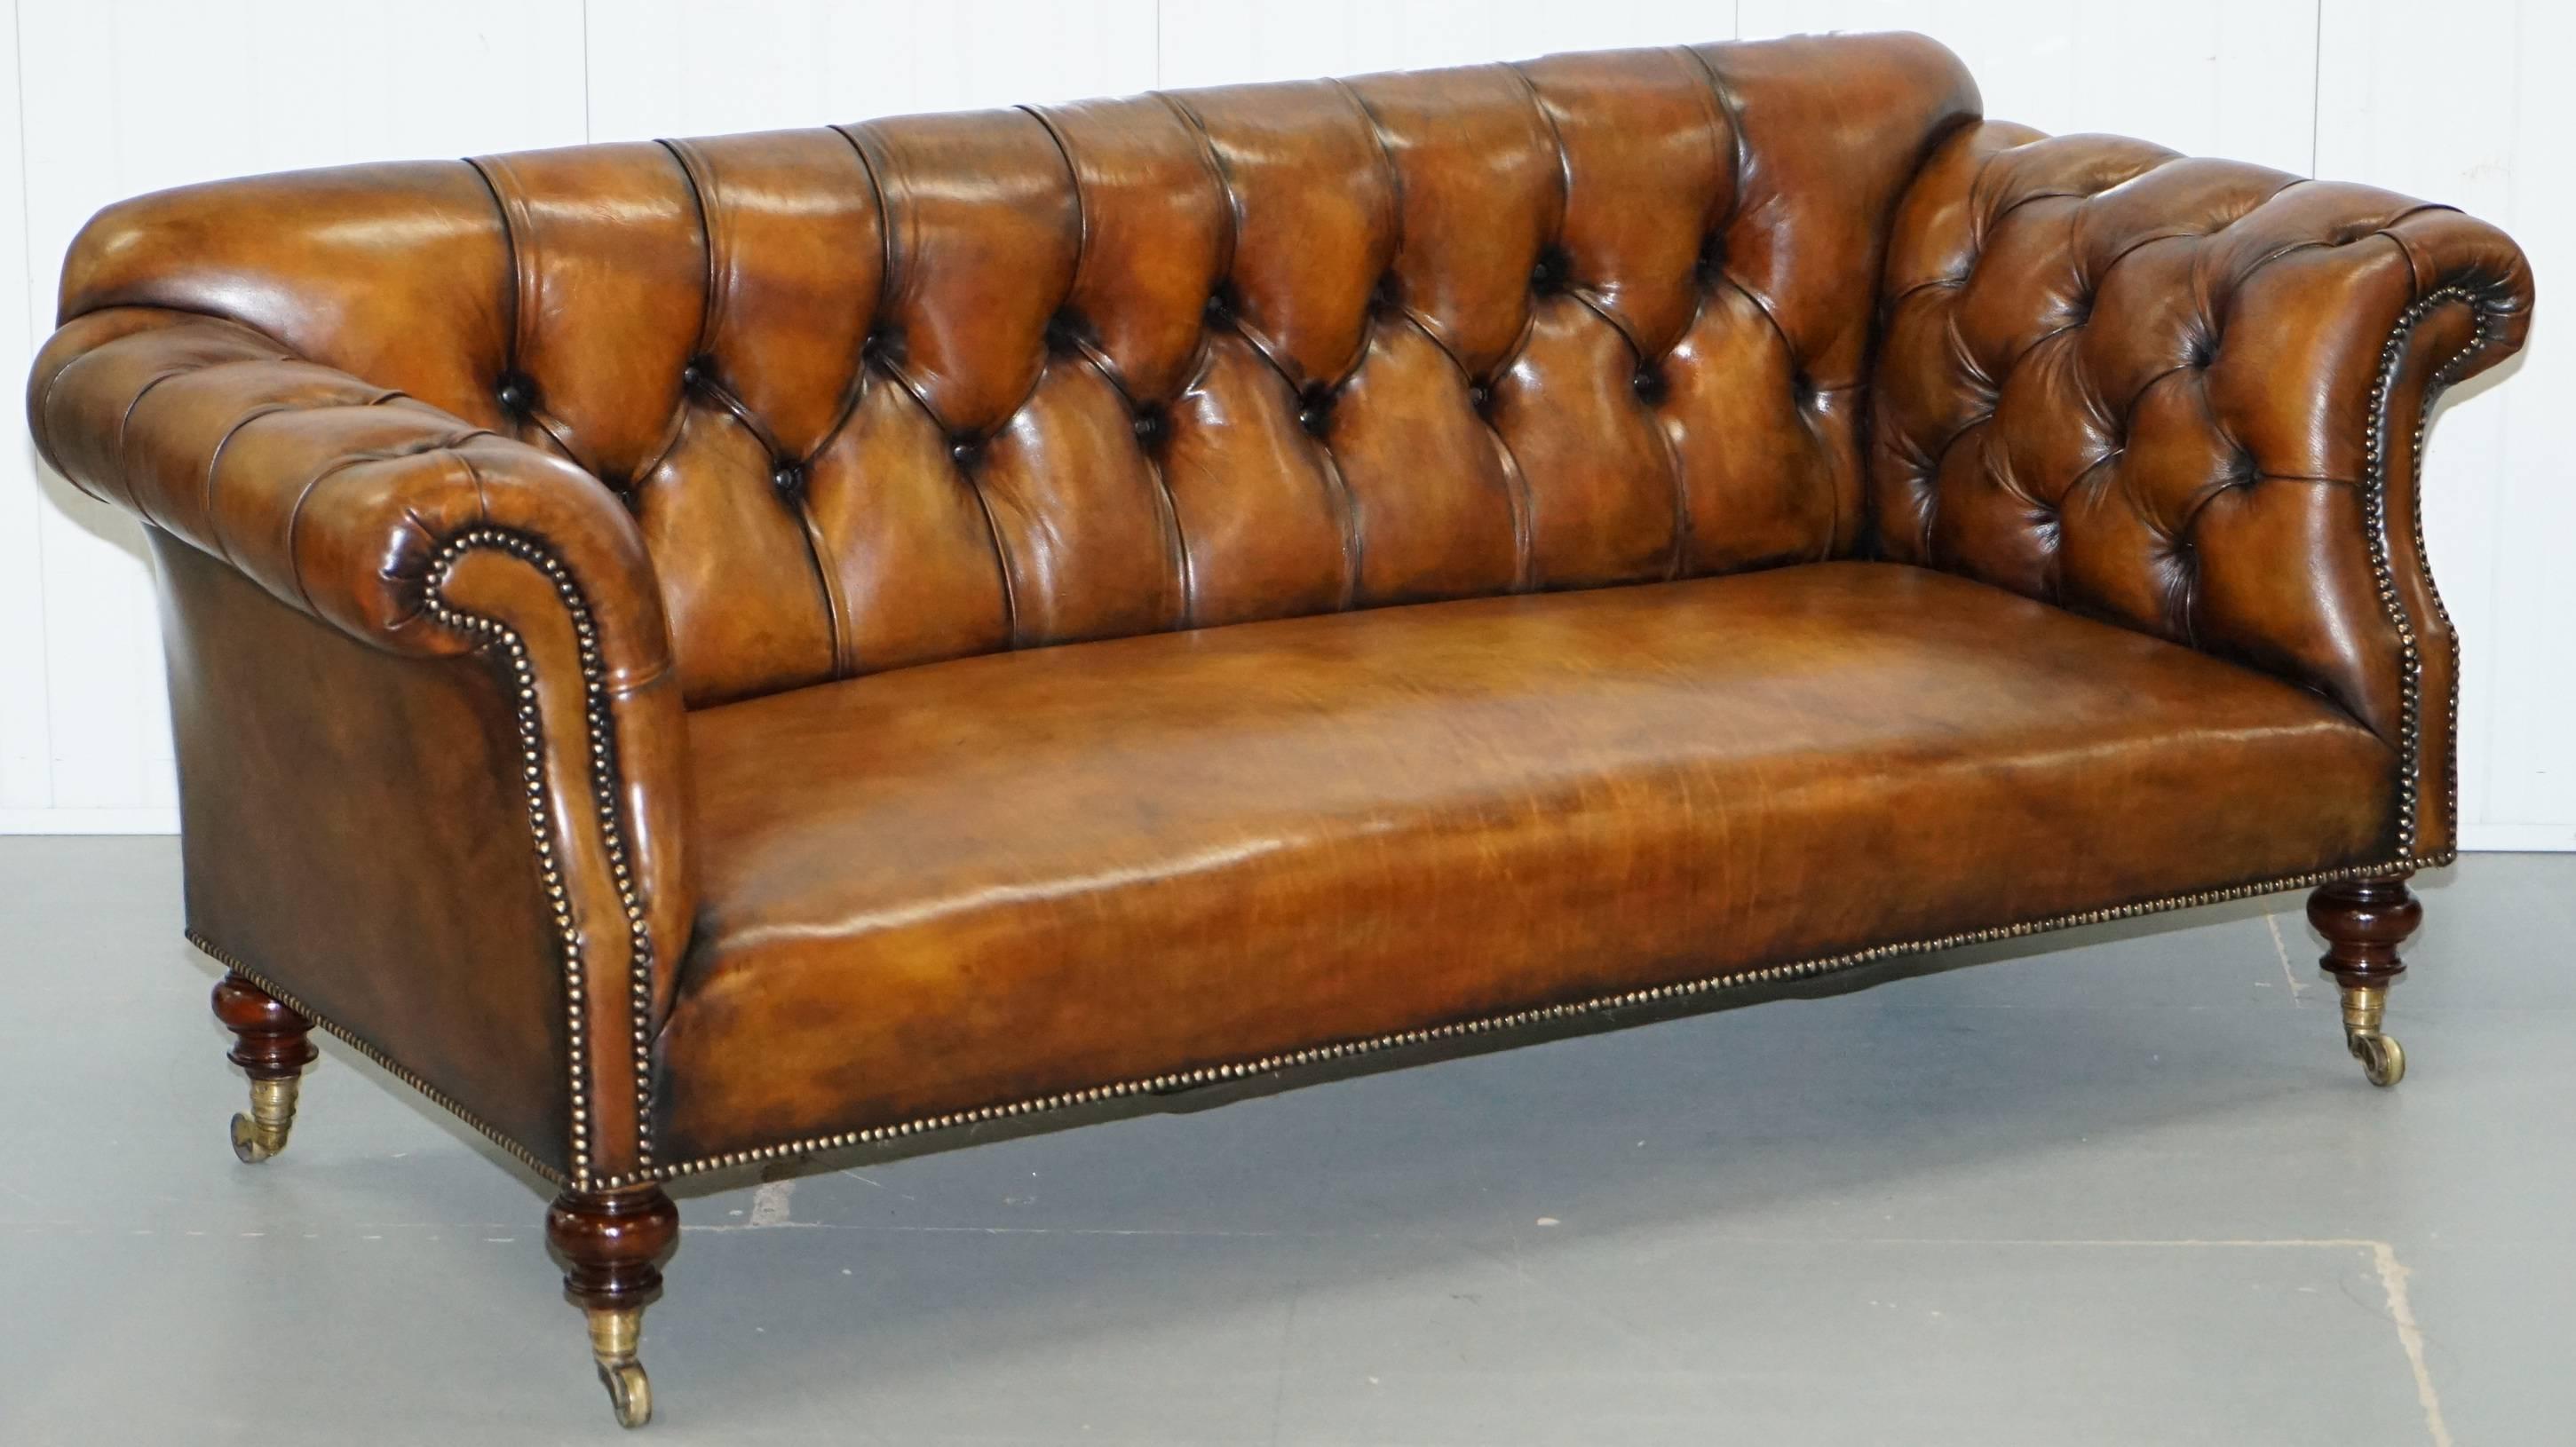 We are delighted to offer for sale this stunning exceptionally rare original early Victorian Howard & Son’s Berners street tobacco brown leather fully restored Chesterfield buttoned sofa

I have a Howard and Son's armchair listed under my other